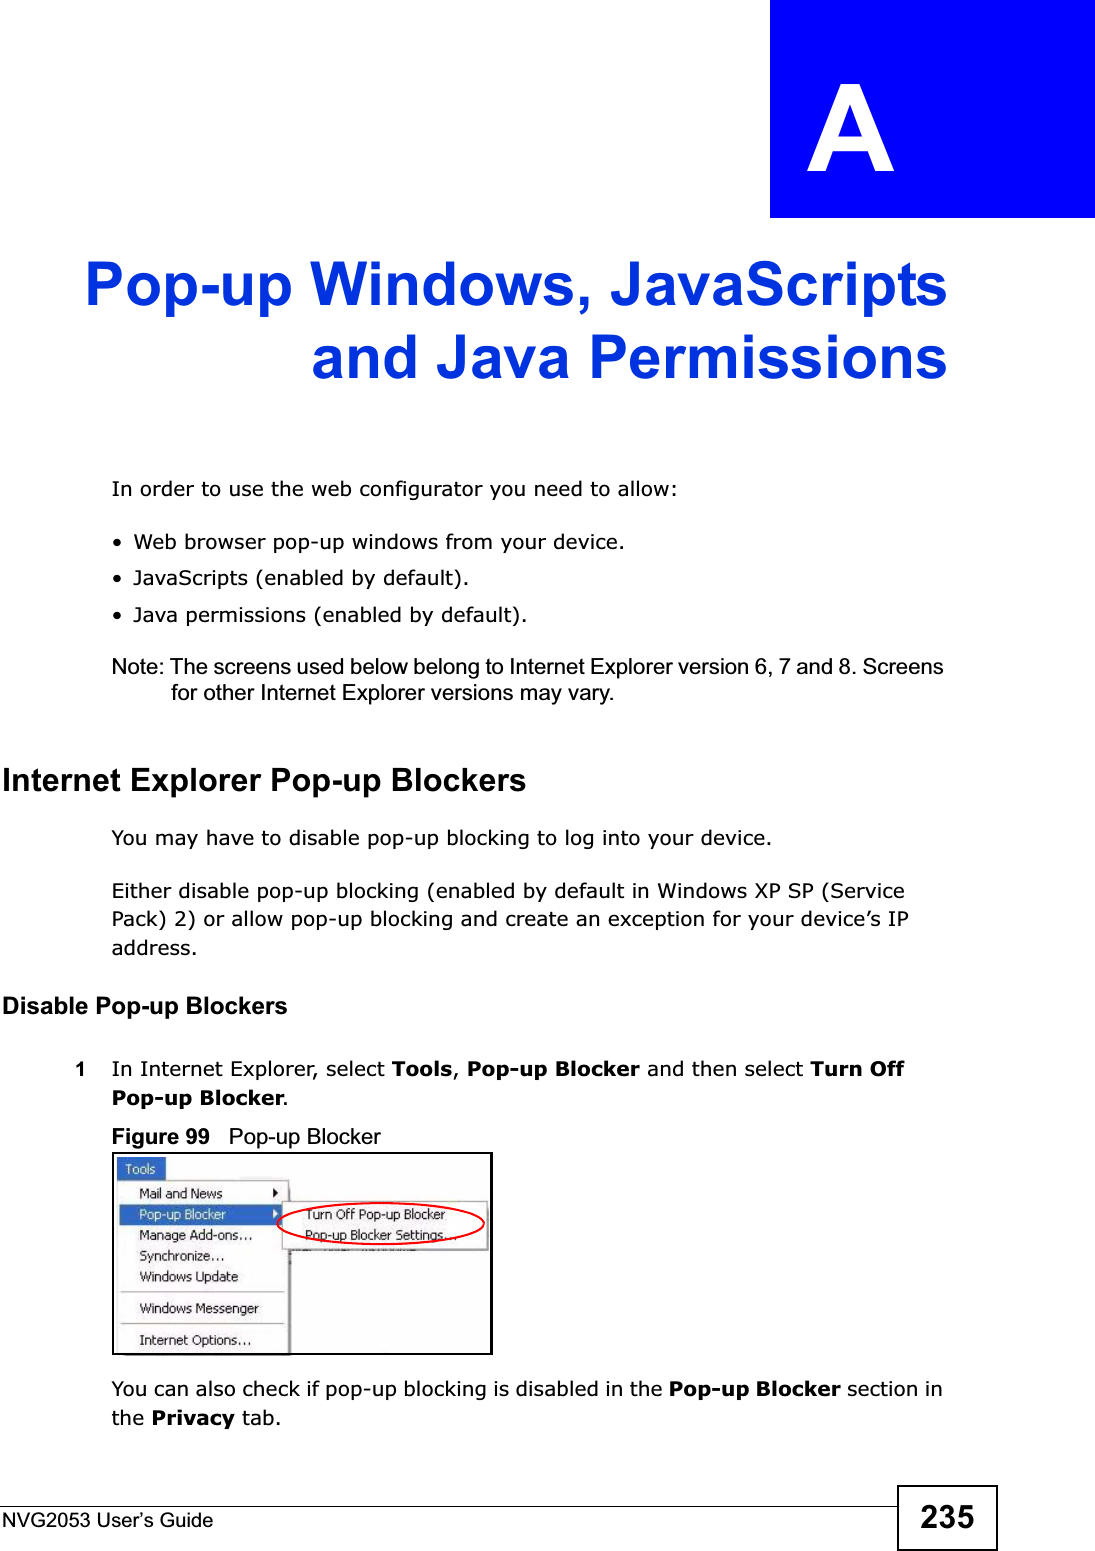 NVG2053 User’s Guide 235APPENDIX  A Pop-up Windows, JavaScriptsand Java PermissionsIn order to use the web configurator you need to allow:• Web browser pop-up windows from your device.• JavaScripts (enabled by default).• Java permissions (enabled by default).Note: The screens used below belong to Internet Explorer version 6, 7 and 8. Screens for other Internet Explorer versions may vary.Internet Explorer Pop-up BlockersYou may have to disable pop-up blocking to log into your device. Either disable pop-up blocking (enabled by default in Windows XP SP (Service Pack) 2) or allow pop-up blocking and create an exception for your device’s IP address.Disable Pop-up Blockers1In Internet Explorer, select Tools,Pop-up Blocker and then select Turn Off Pop-up Blocker.Figure 99   Pop-up BlockerYou can also check if pop-up blocking is disabled in the Pop-up Blocker section in the Privacy tab. 